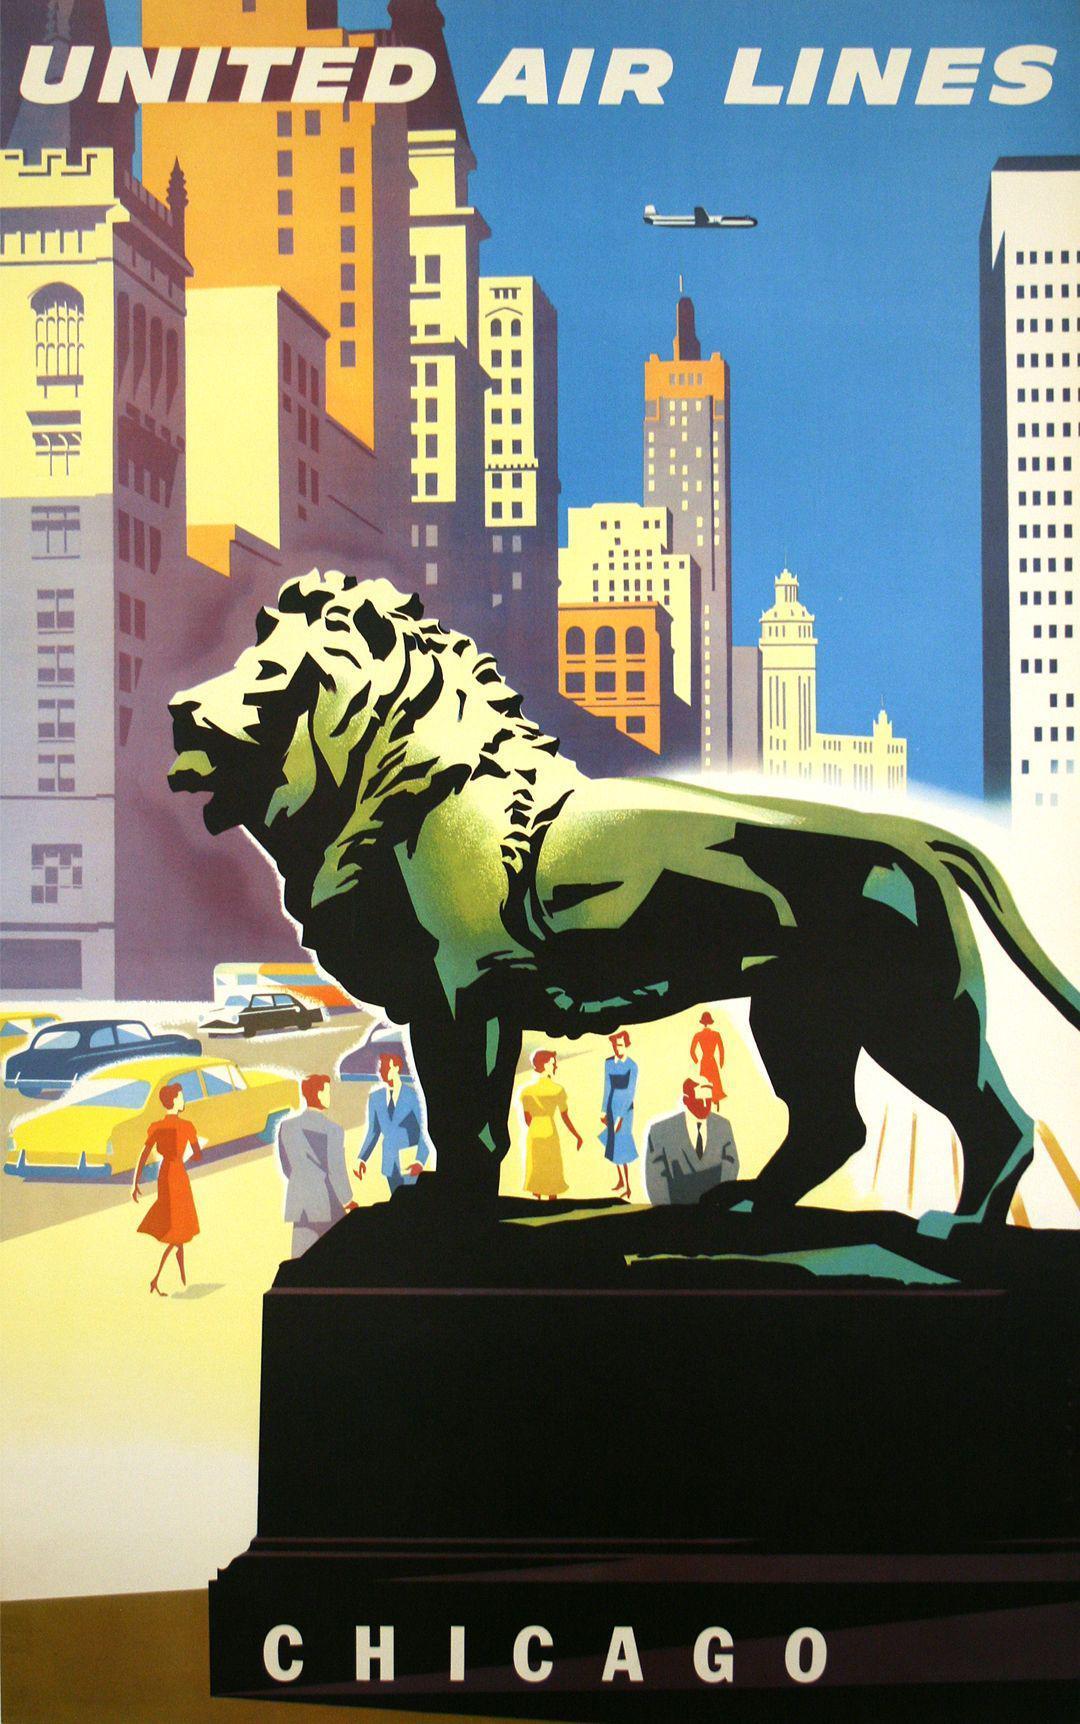 Original United Air Lines Chicago Poster 1957 by Joseph Binder